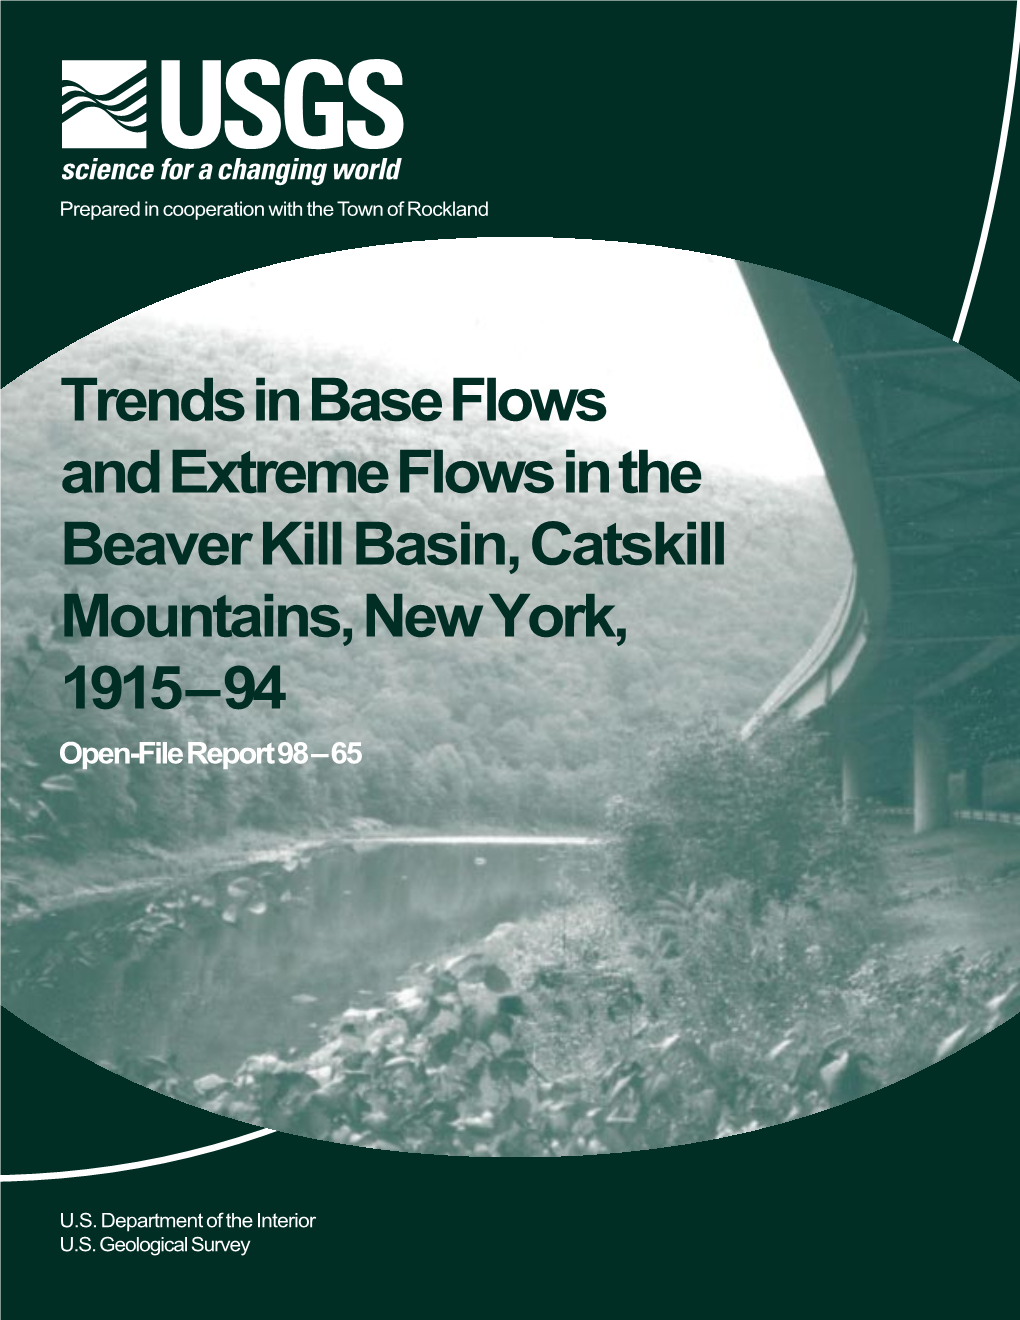 Trends in Base Flows and Extreme Flows in the Beaver Kill Basin, Catskill Mountains, New York, 1915 – 94 Open-File Report 98 – 65